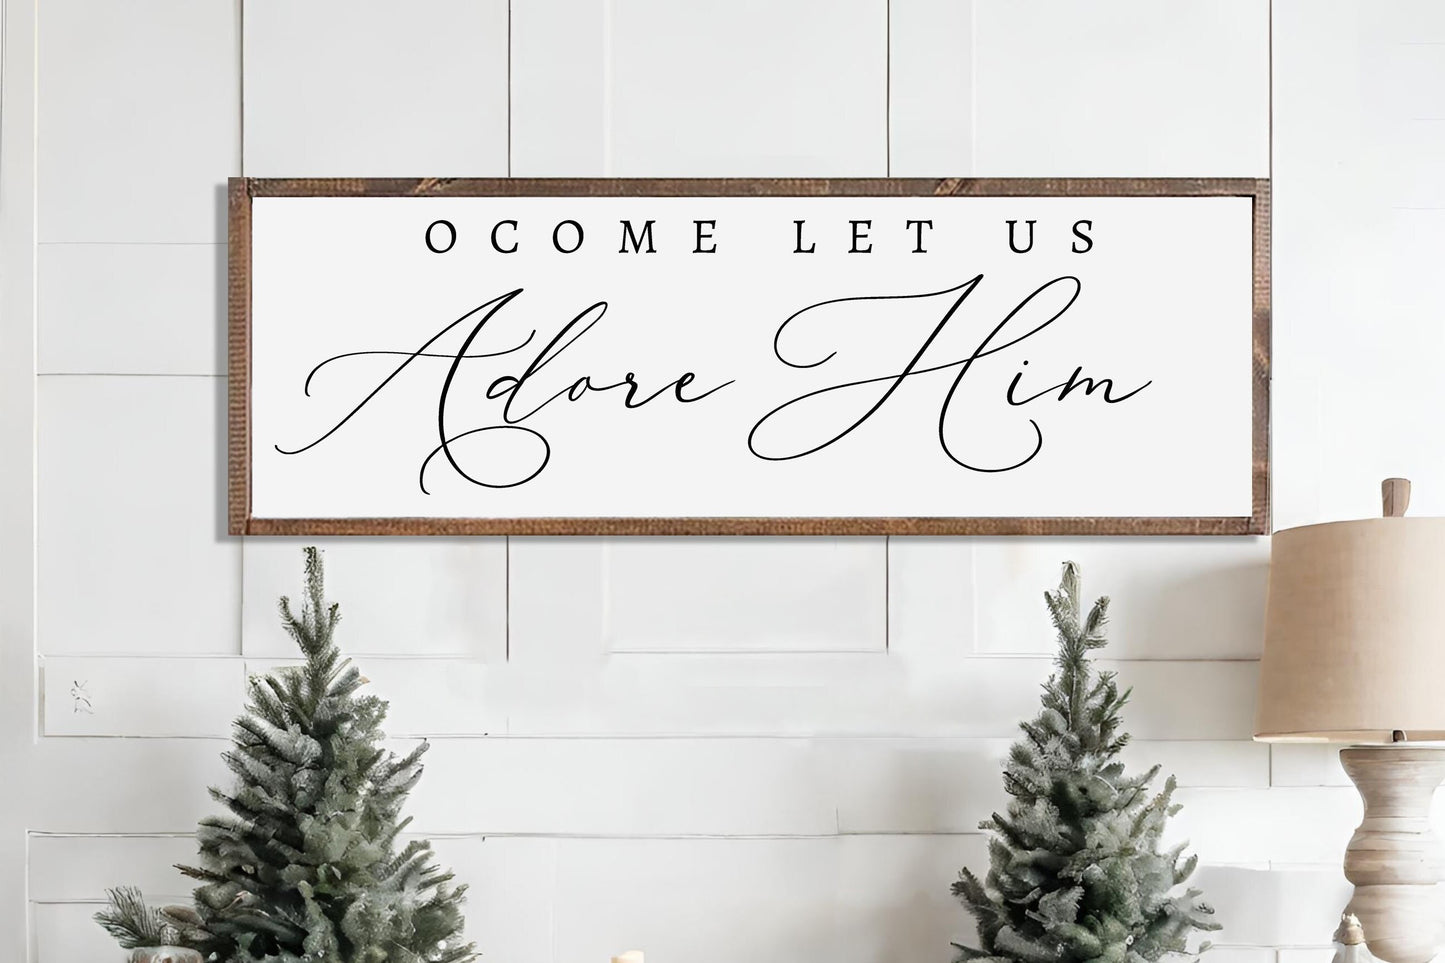 O Come Let Us Adore Him, Christmas Wood Sign. Available in several sizes. Made of Wood.